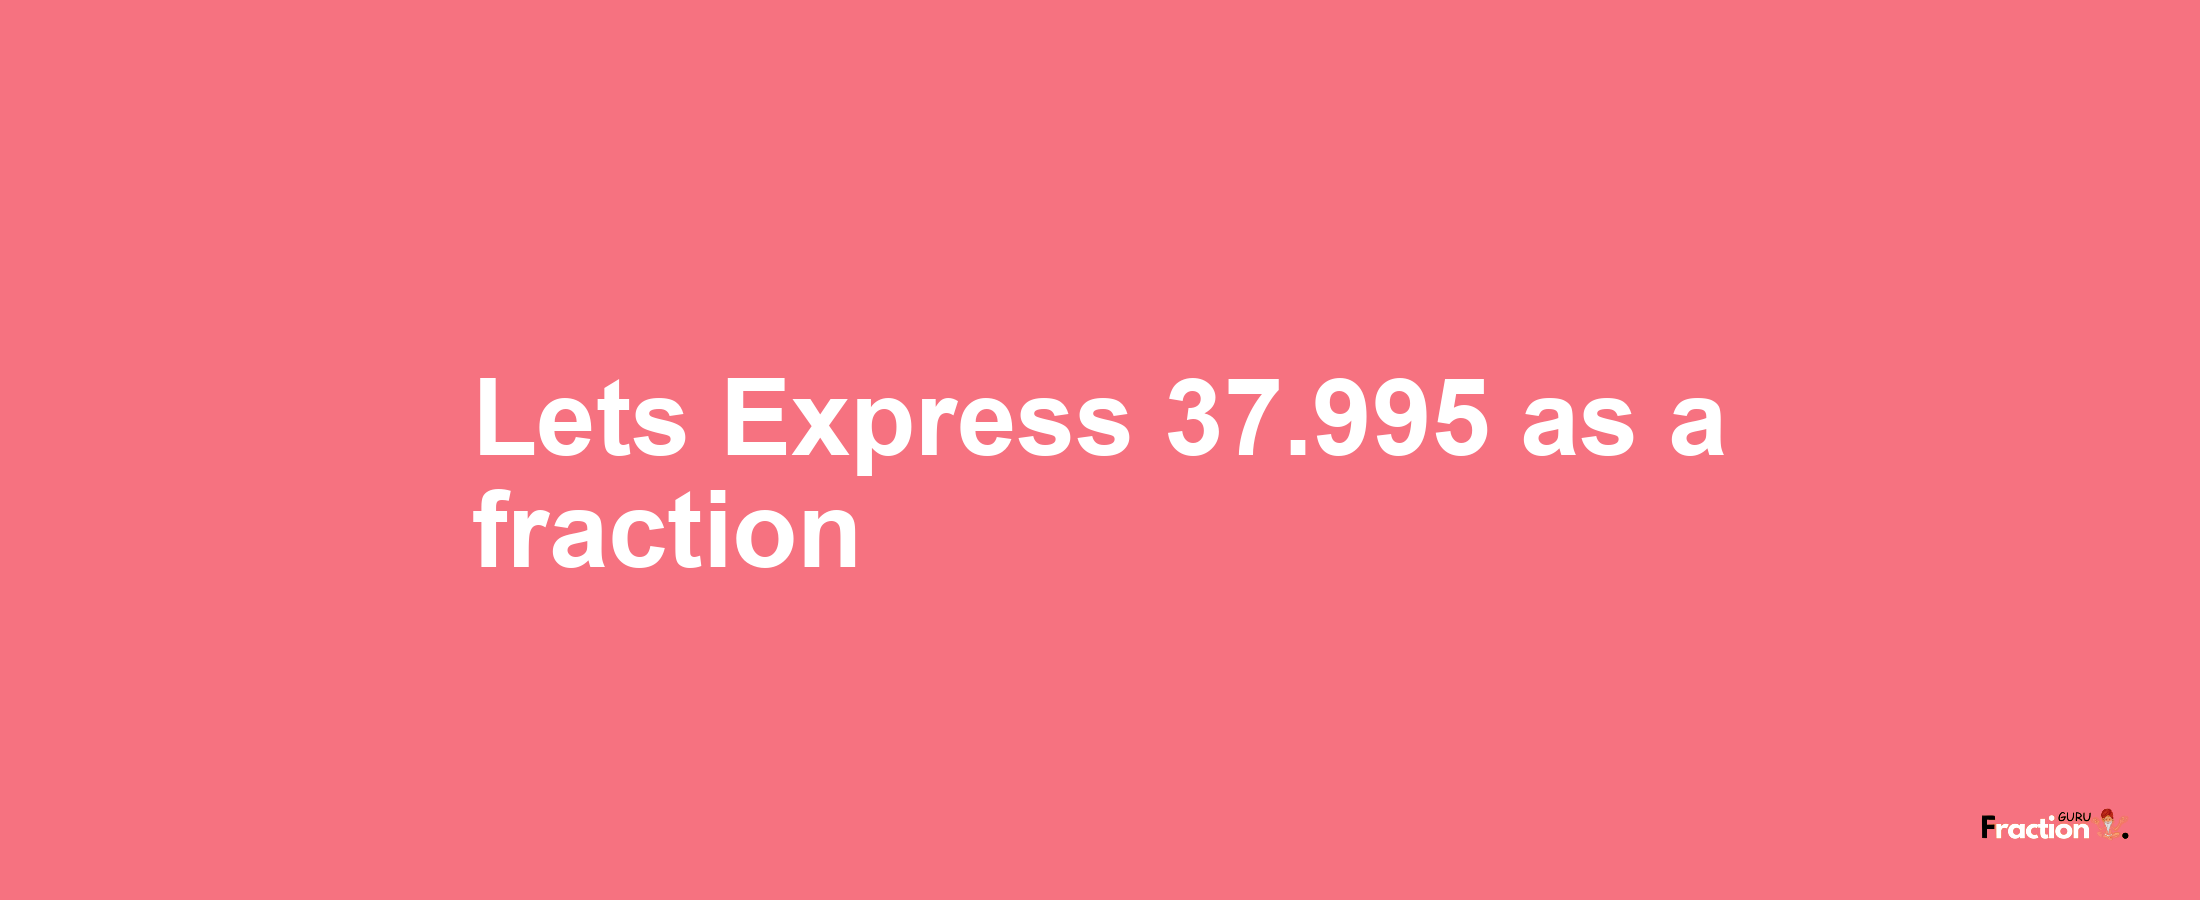 Lets Express 37.995 as afraction